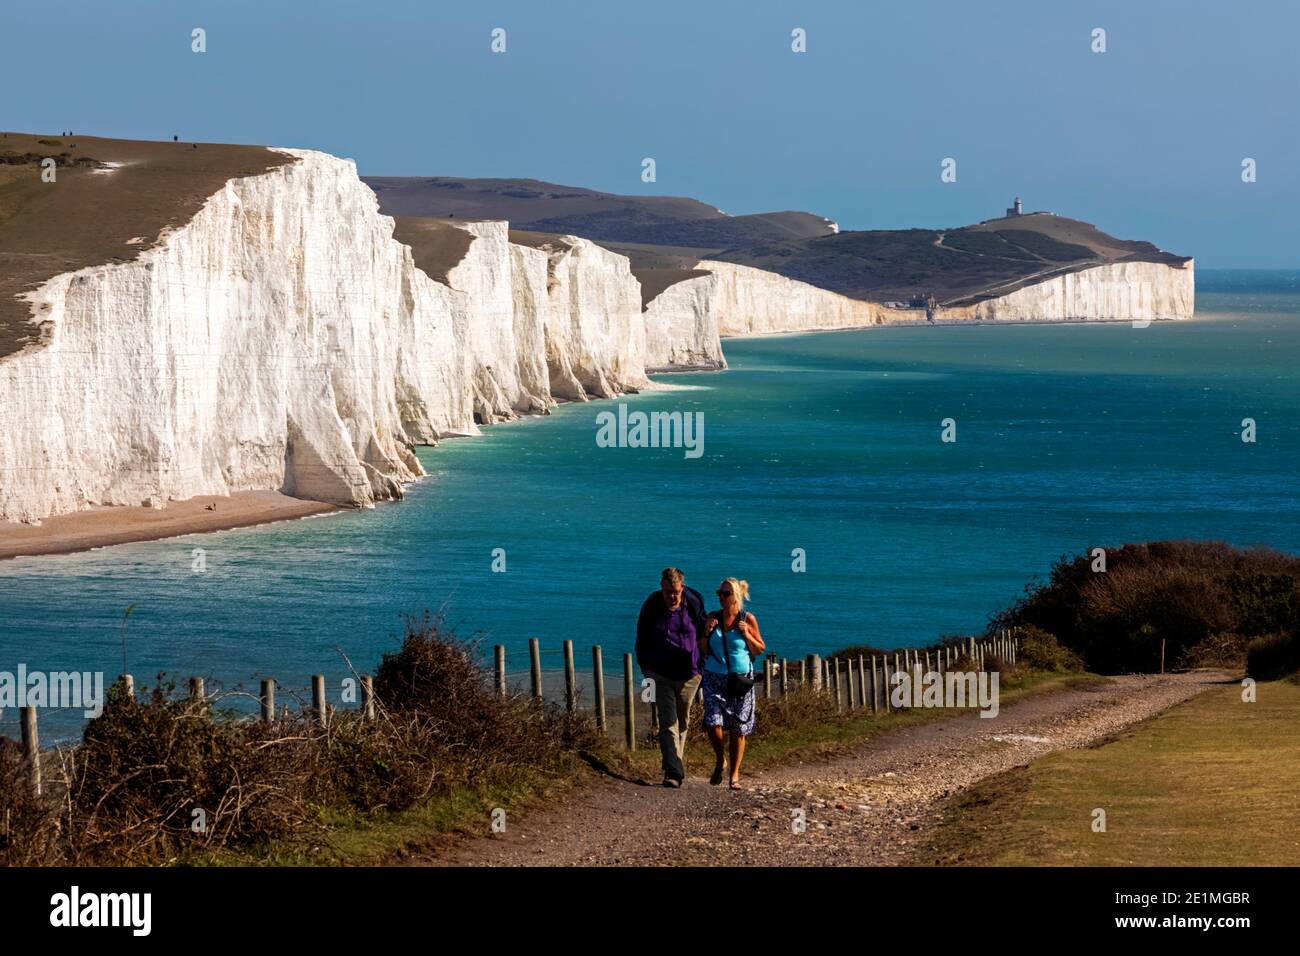 England, East Sussex, Eastbourne, The Seven Sisters Cliffs Stock Photo